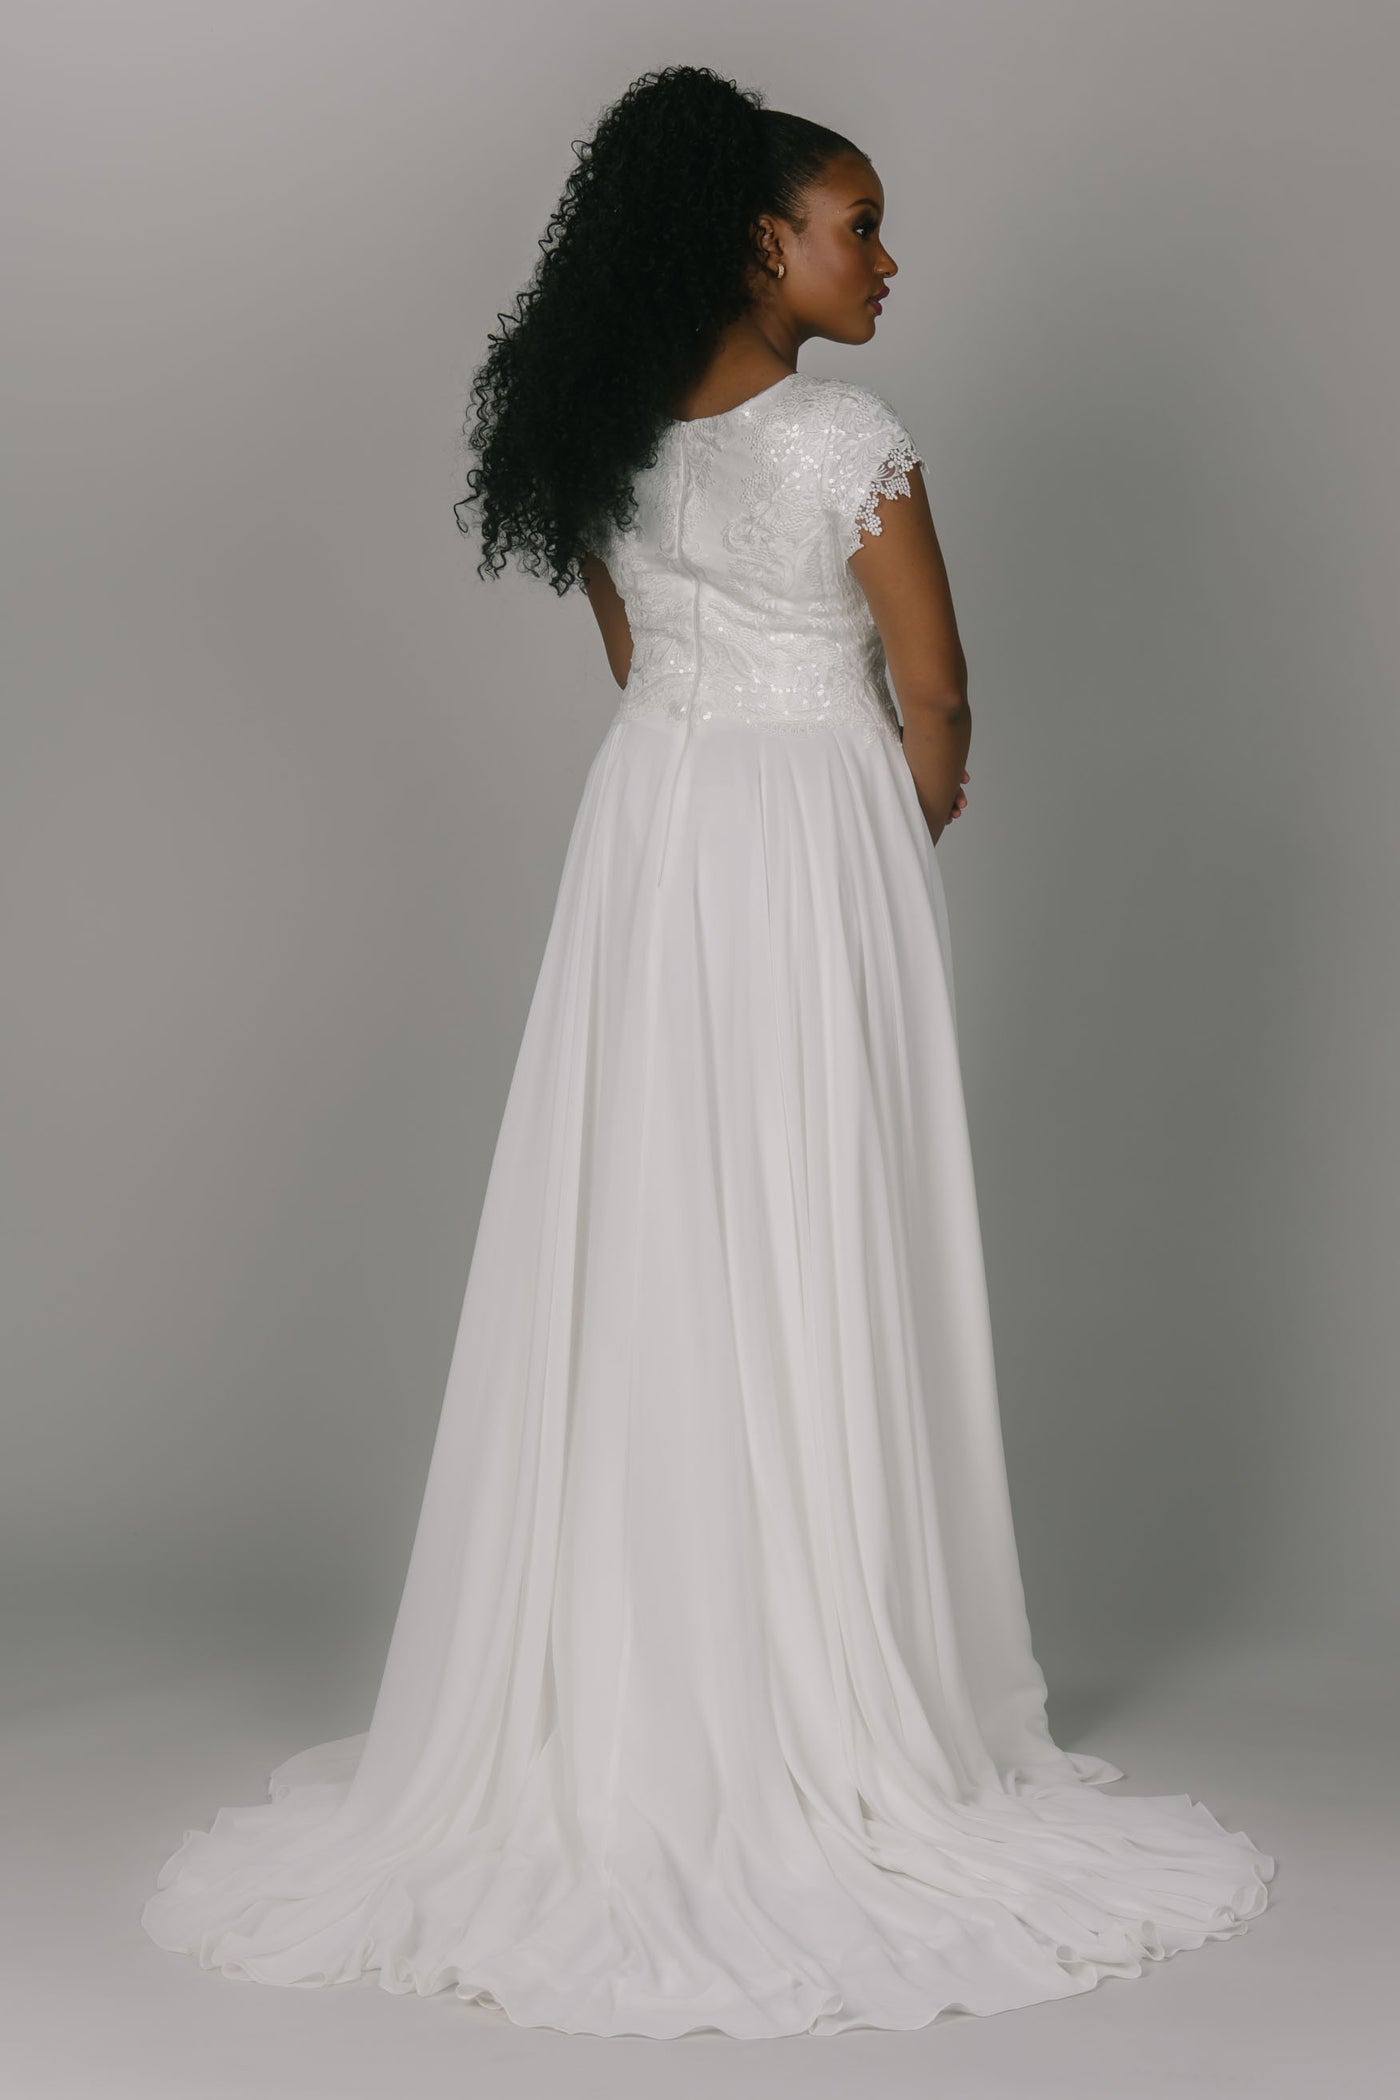 Modest wedding dress featuring an a-line cut. It has a lace and beaded top with a chiffon bottom. It has cap sleeves and a zipper back. This dress is perfect for the modest wedding dress bride looking for something between a a-line and fitted wedding dress.